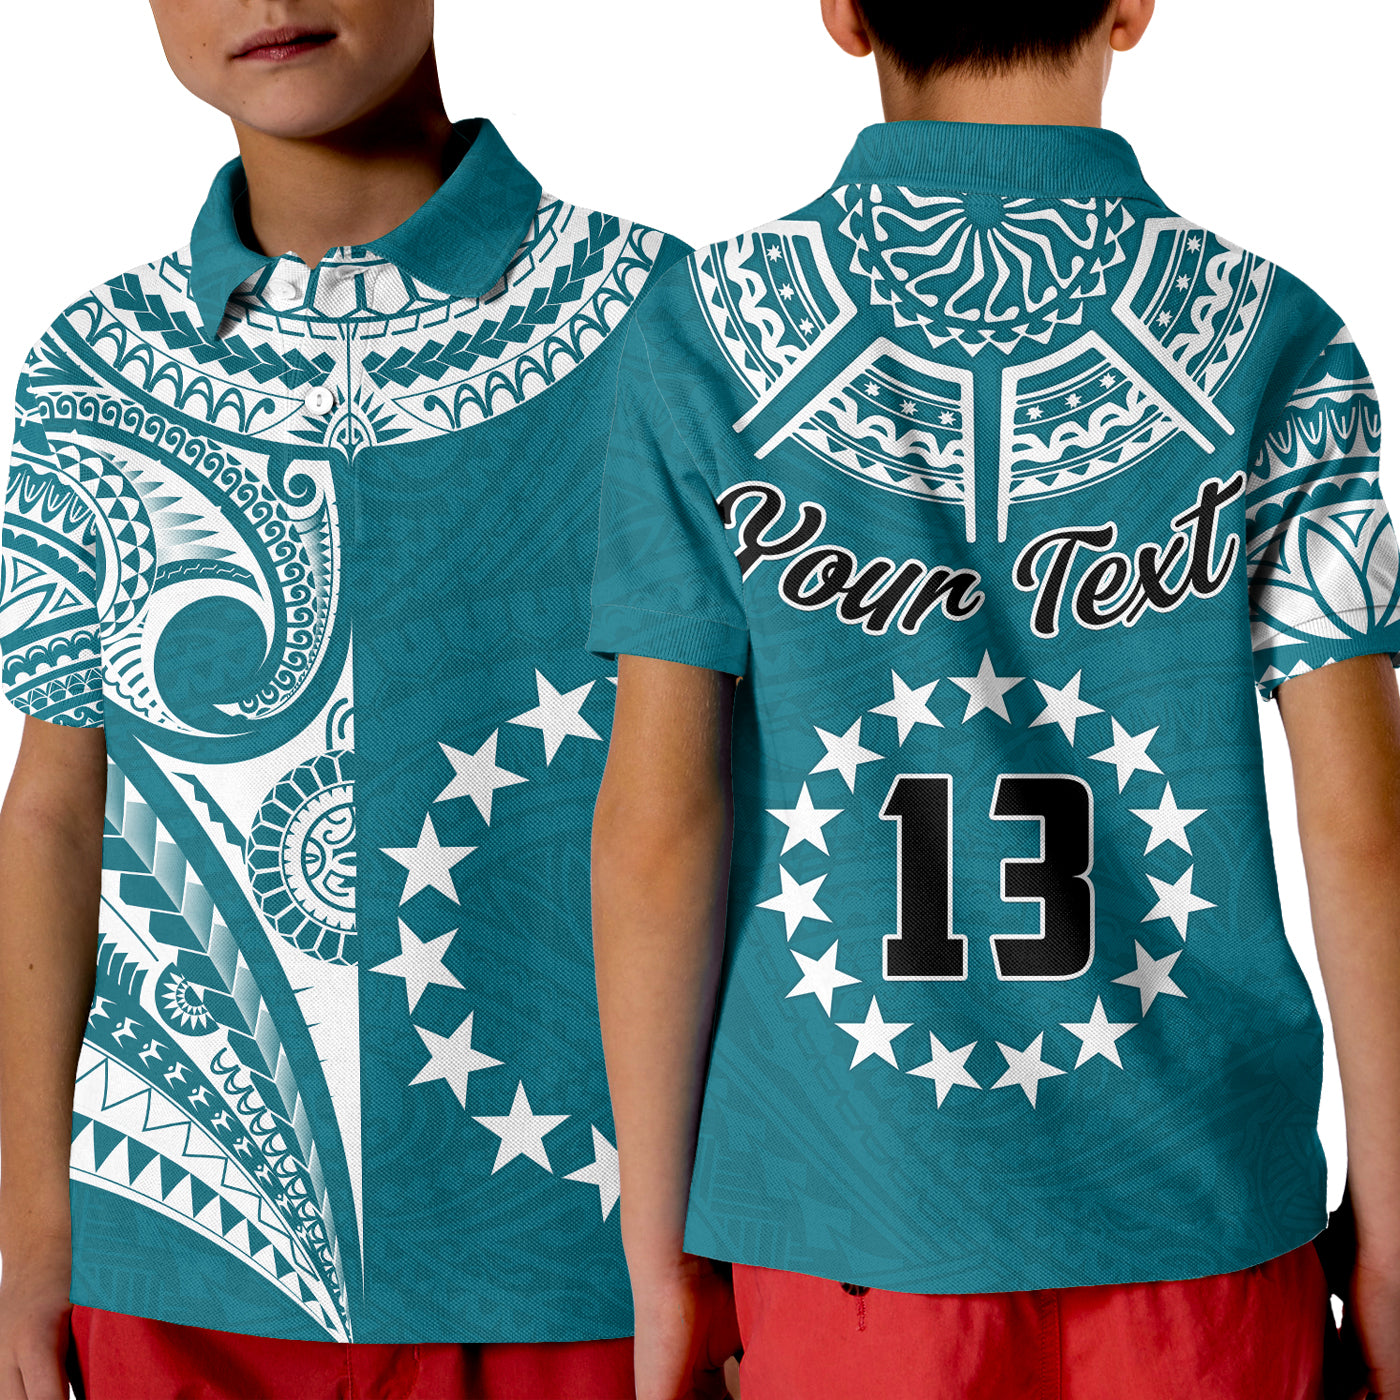 custom-text-and-number-cook-islands-tatau-polo-shirt-kid-symbolize-passion-stars-version-blue